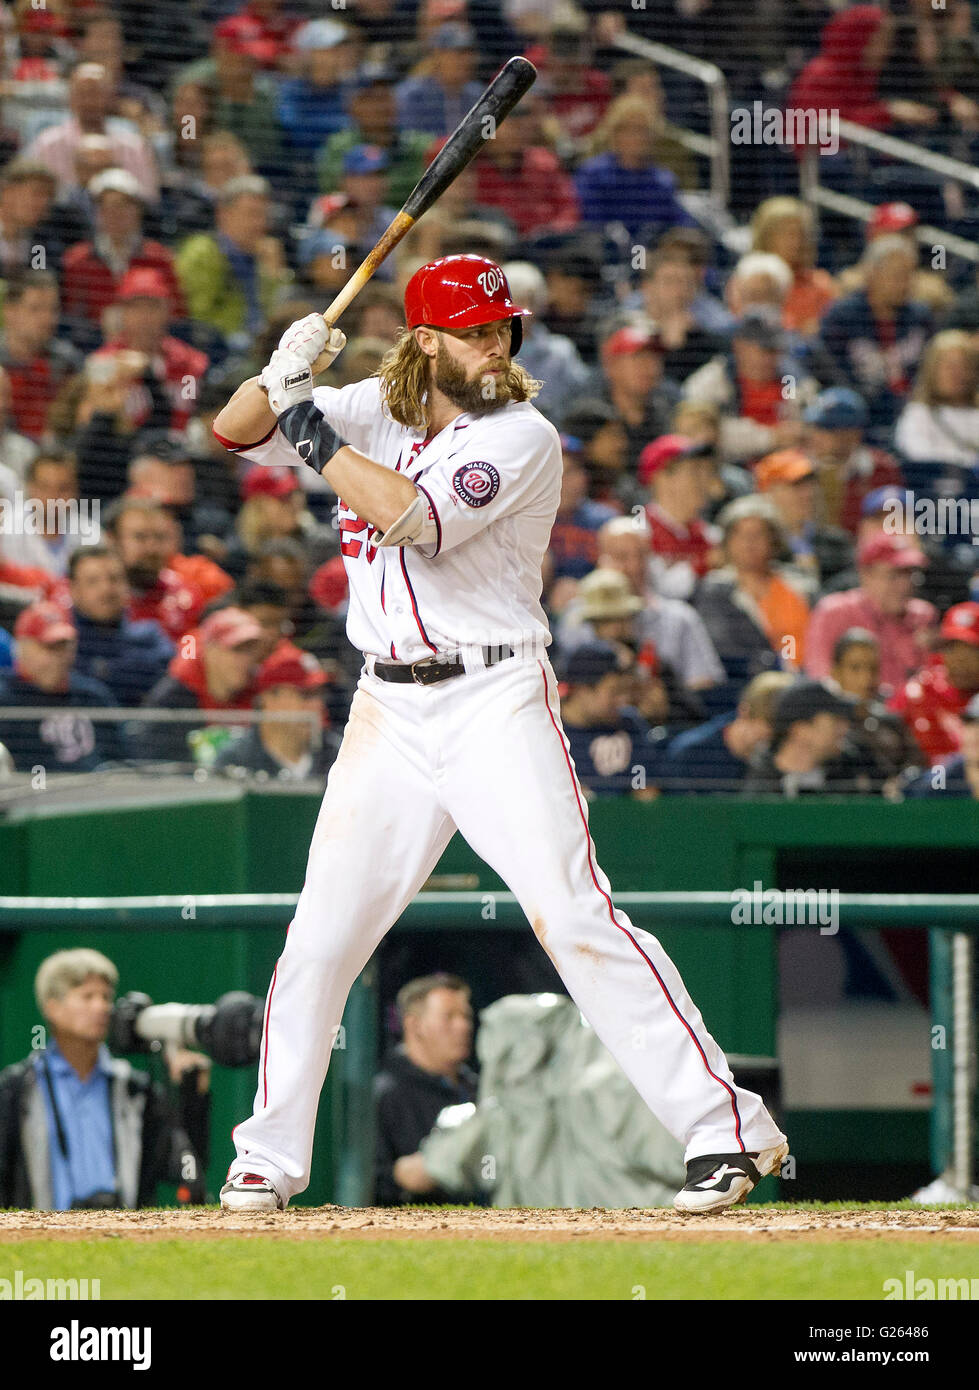 Jayson Werth of the Los Angeles Dodgers during batting practice before game  against the Arizona Diamondbacks at Dodger Stadium in Los Angeles, Calif  Stock Photo - Alamy